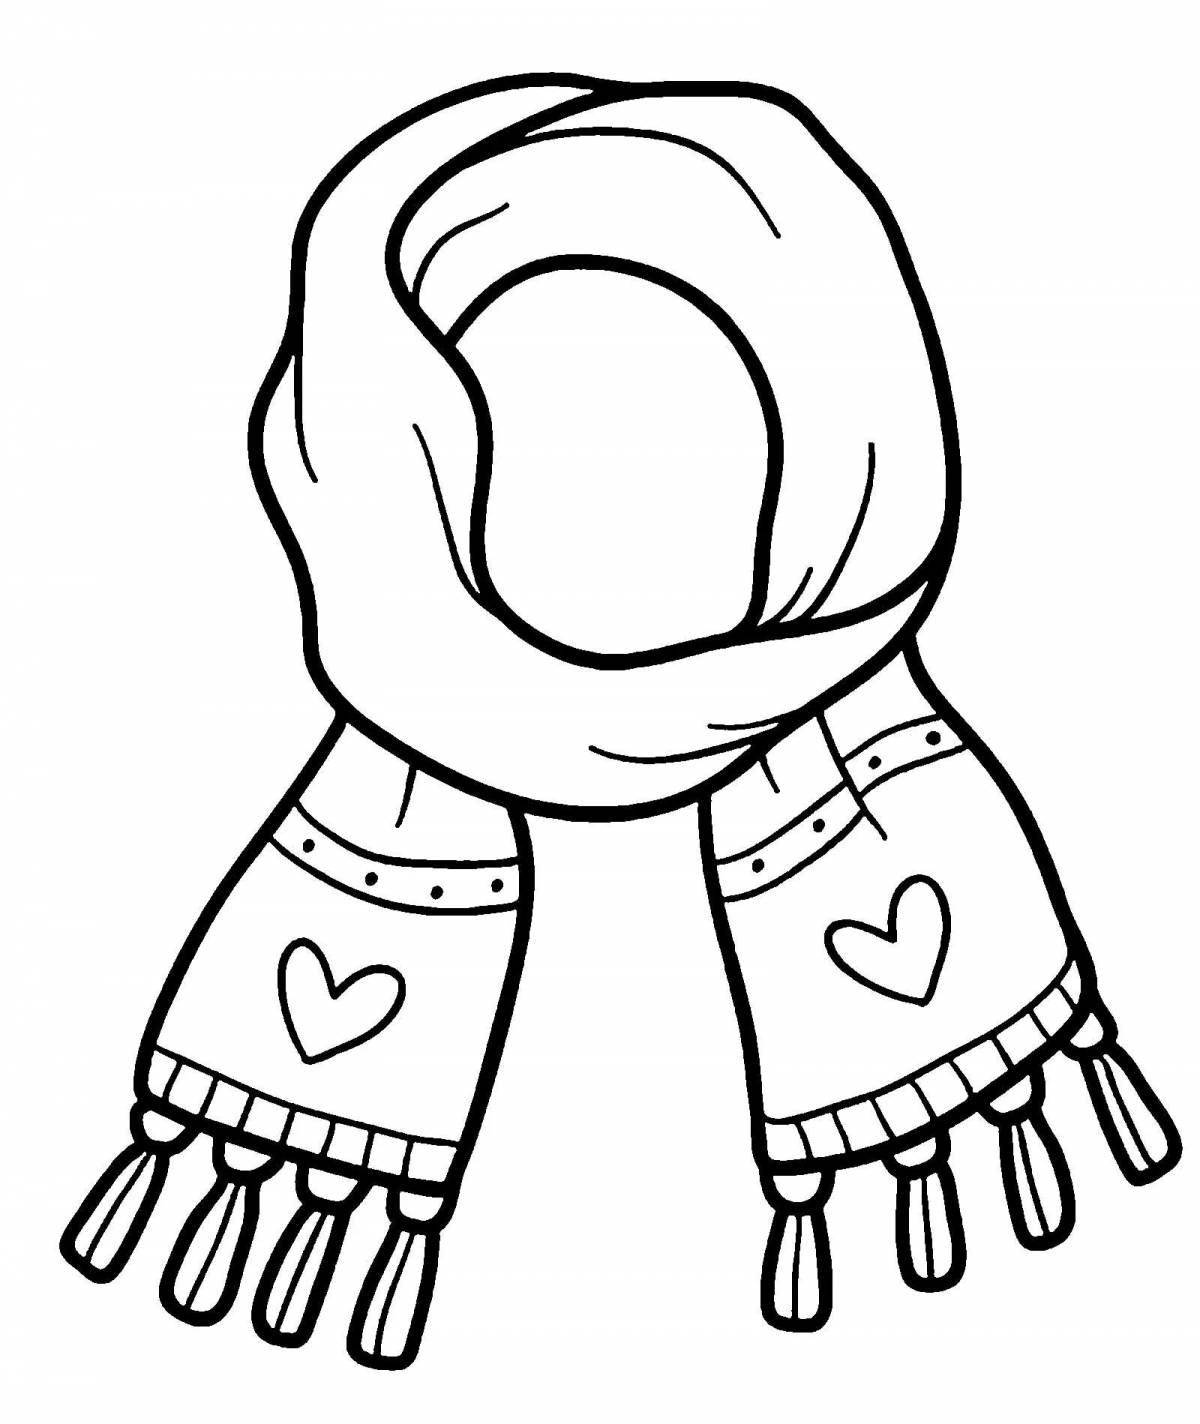 Colorful scarf coloring book for 3-4 year olds